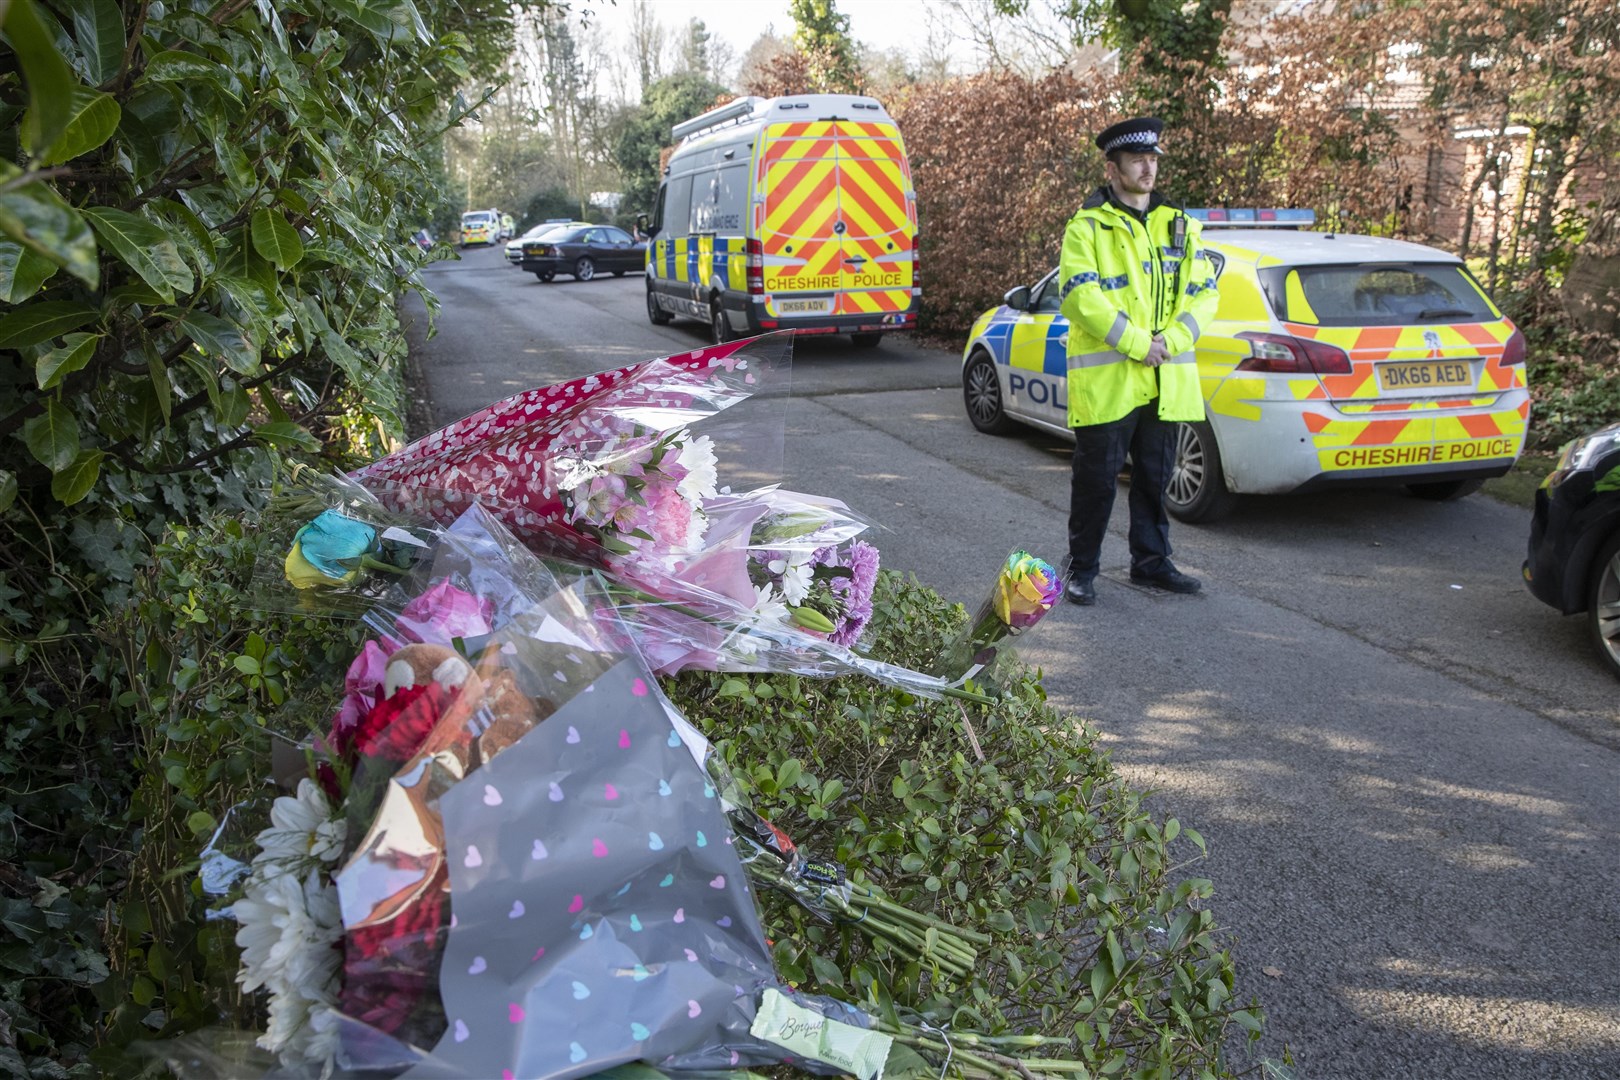 Floral tributes left at the scene on Monday (Jason Roberts/PA)